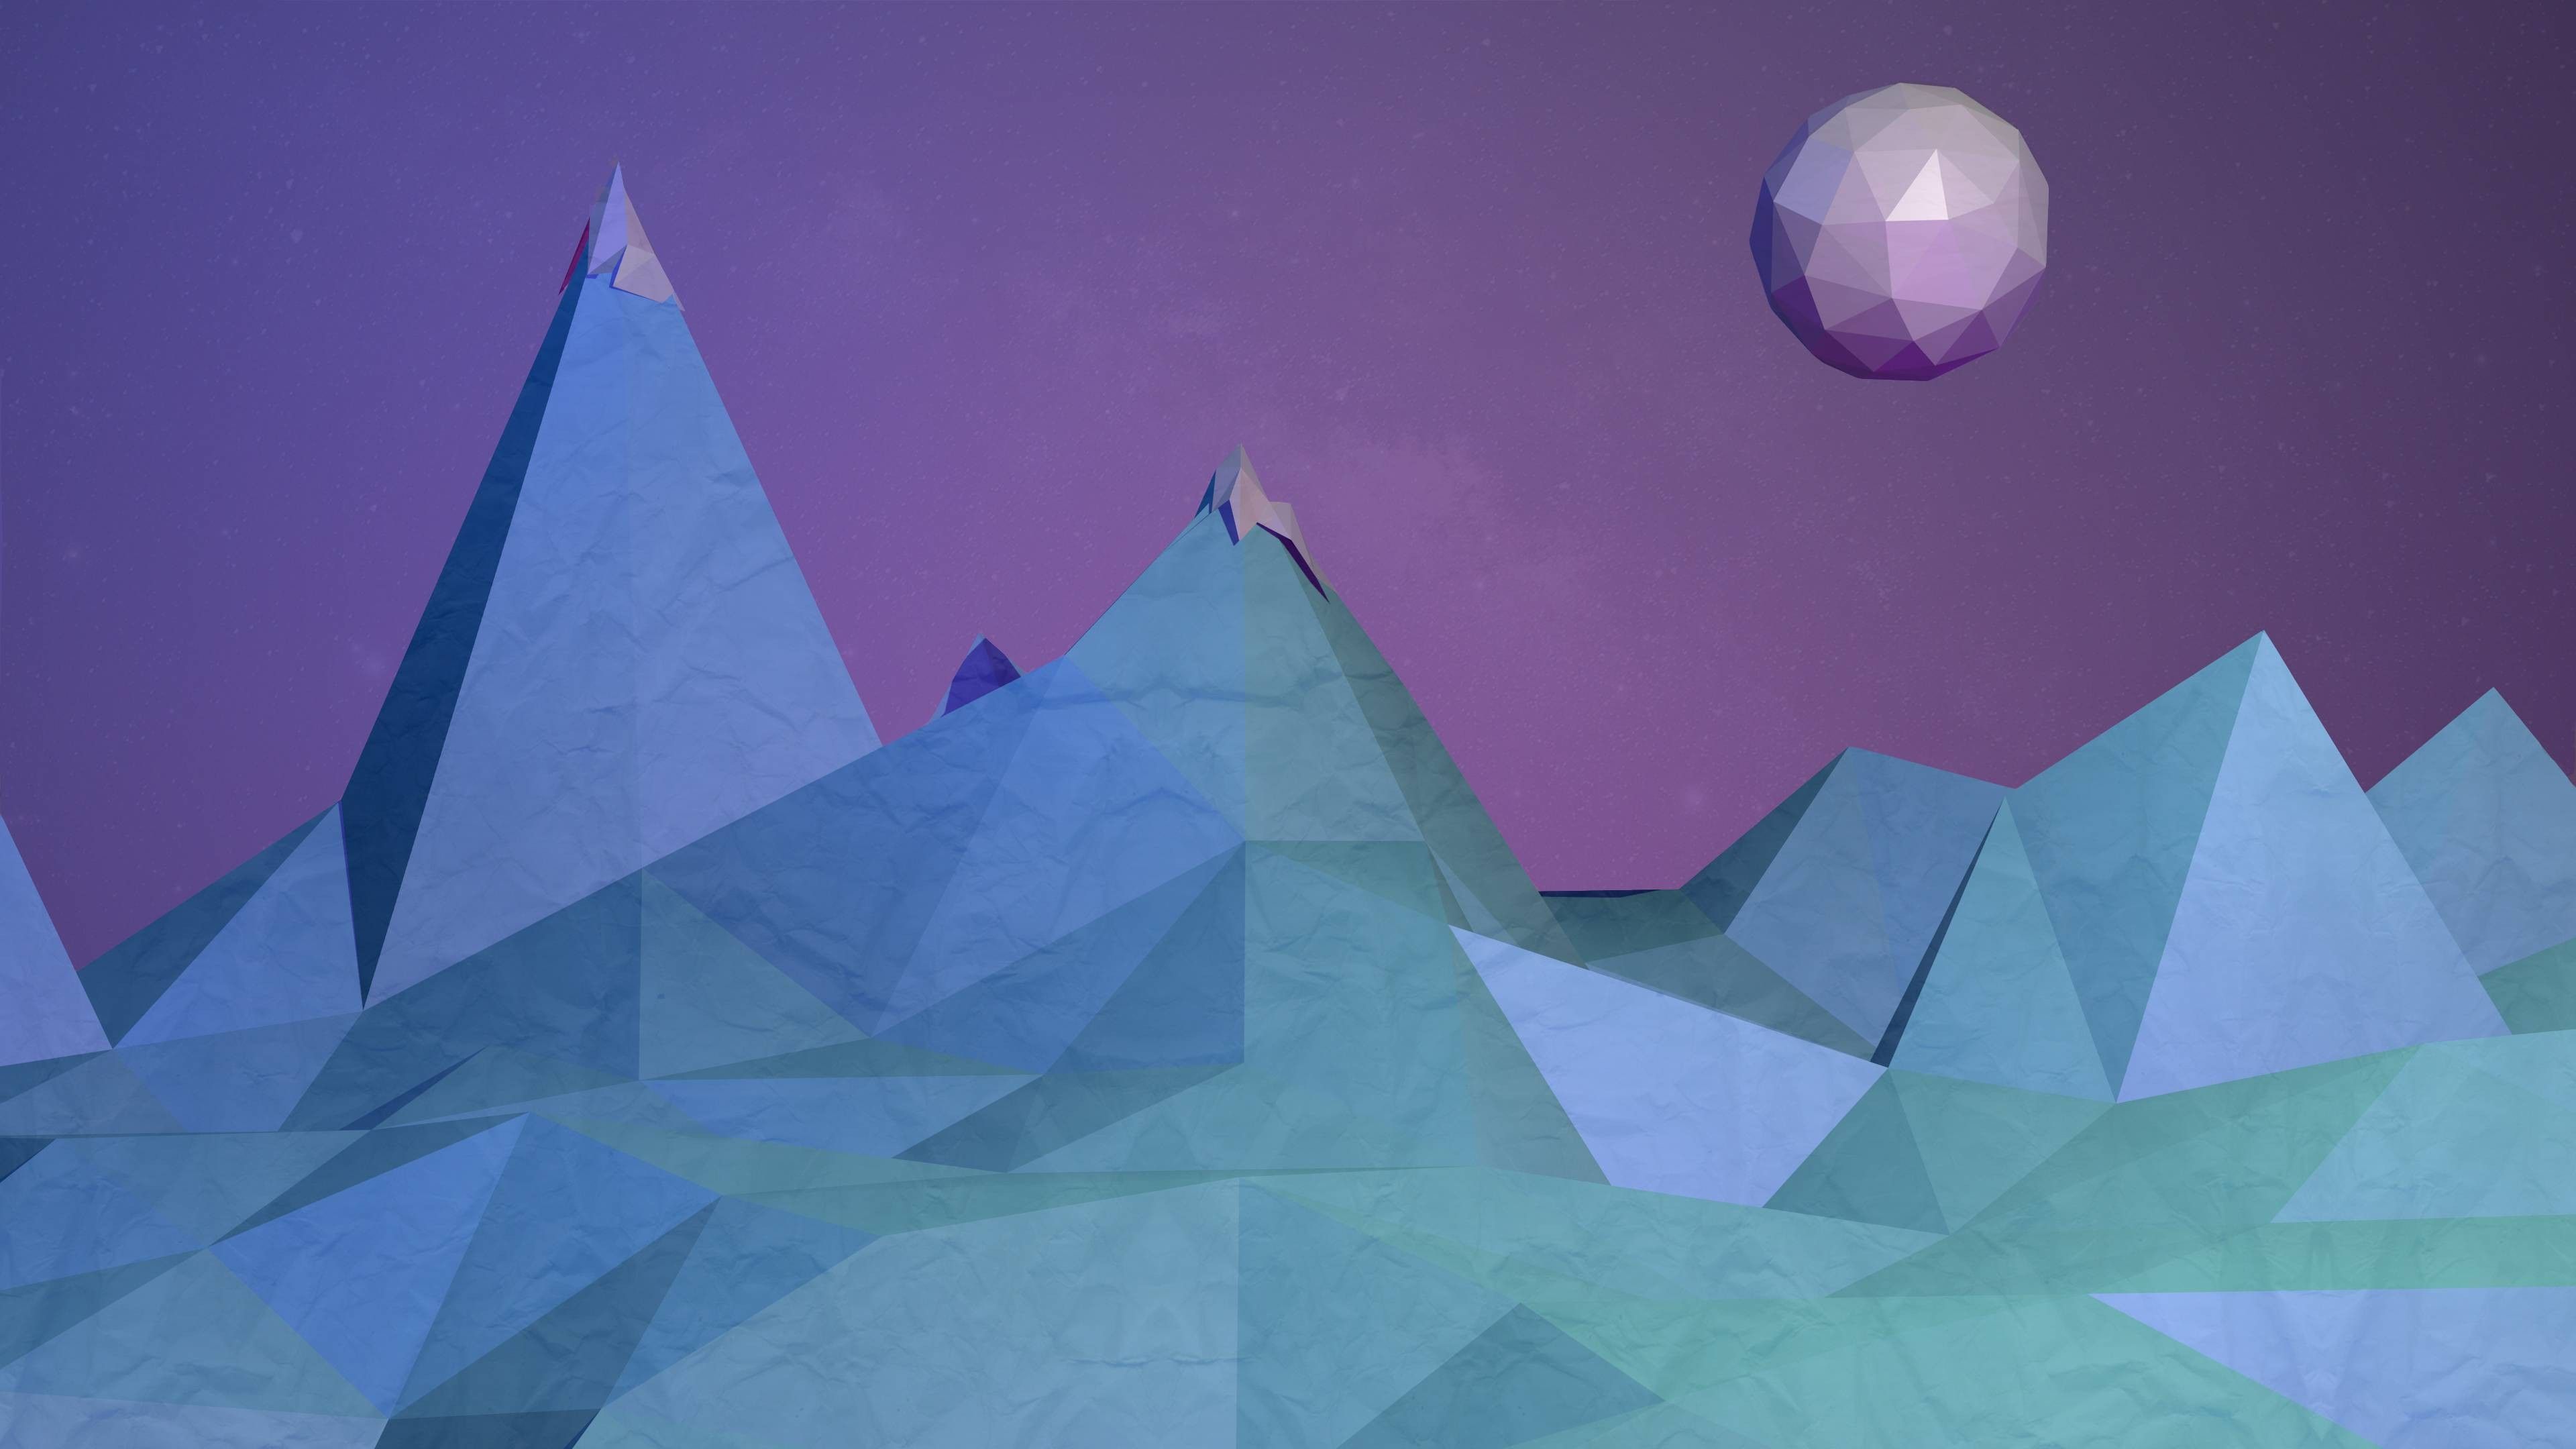 3D, mountains, abstract, low poly, digital art Gallery HD Wallpaper